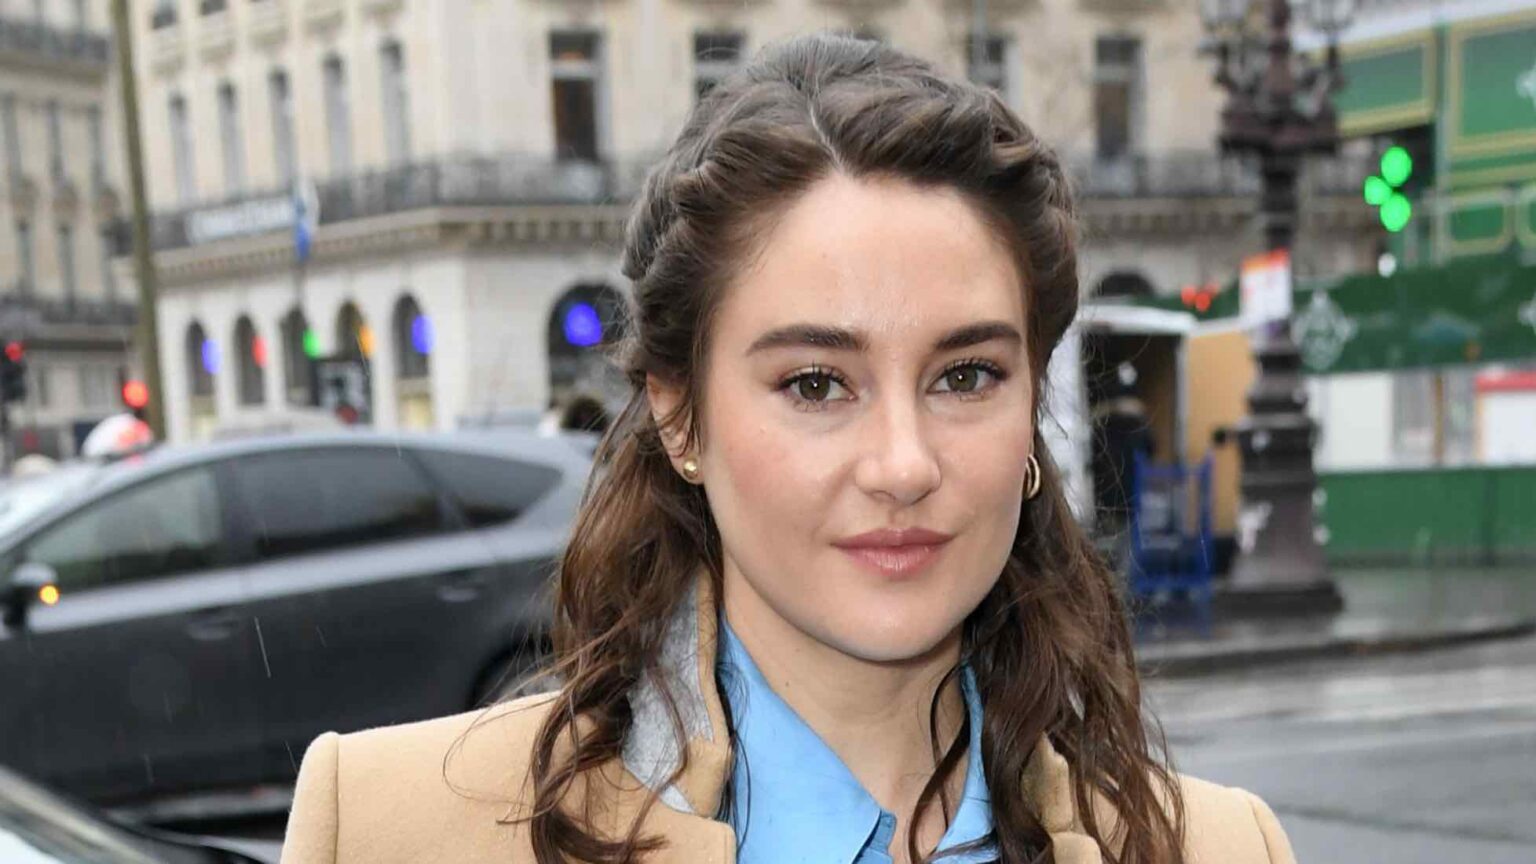 After many boyfriends, Shailene Woodley has found the man of her dreams. Get all the details behind her engagement and relationship to Aaron Rodgers.